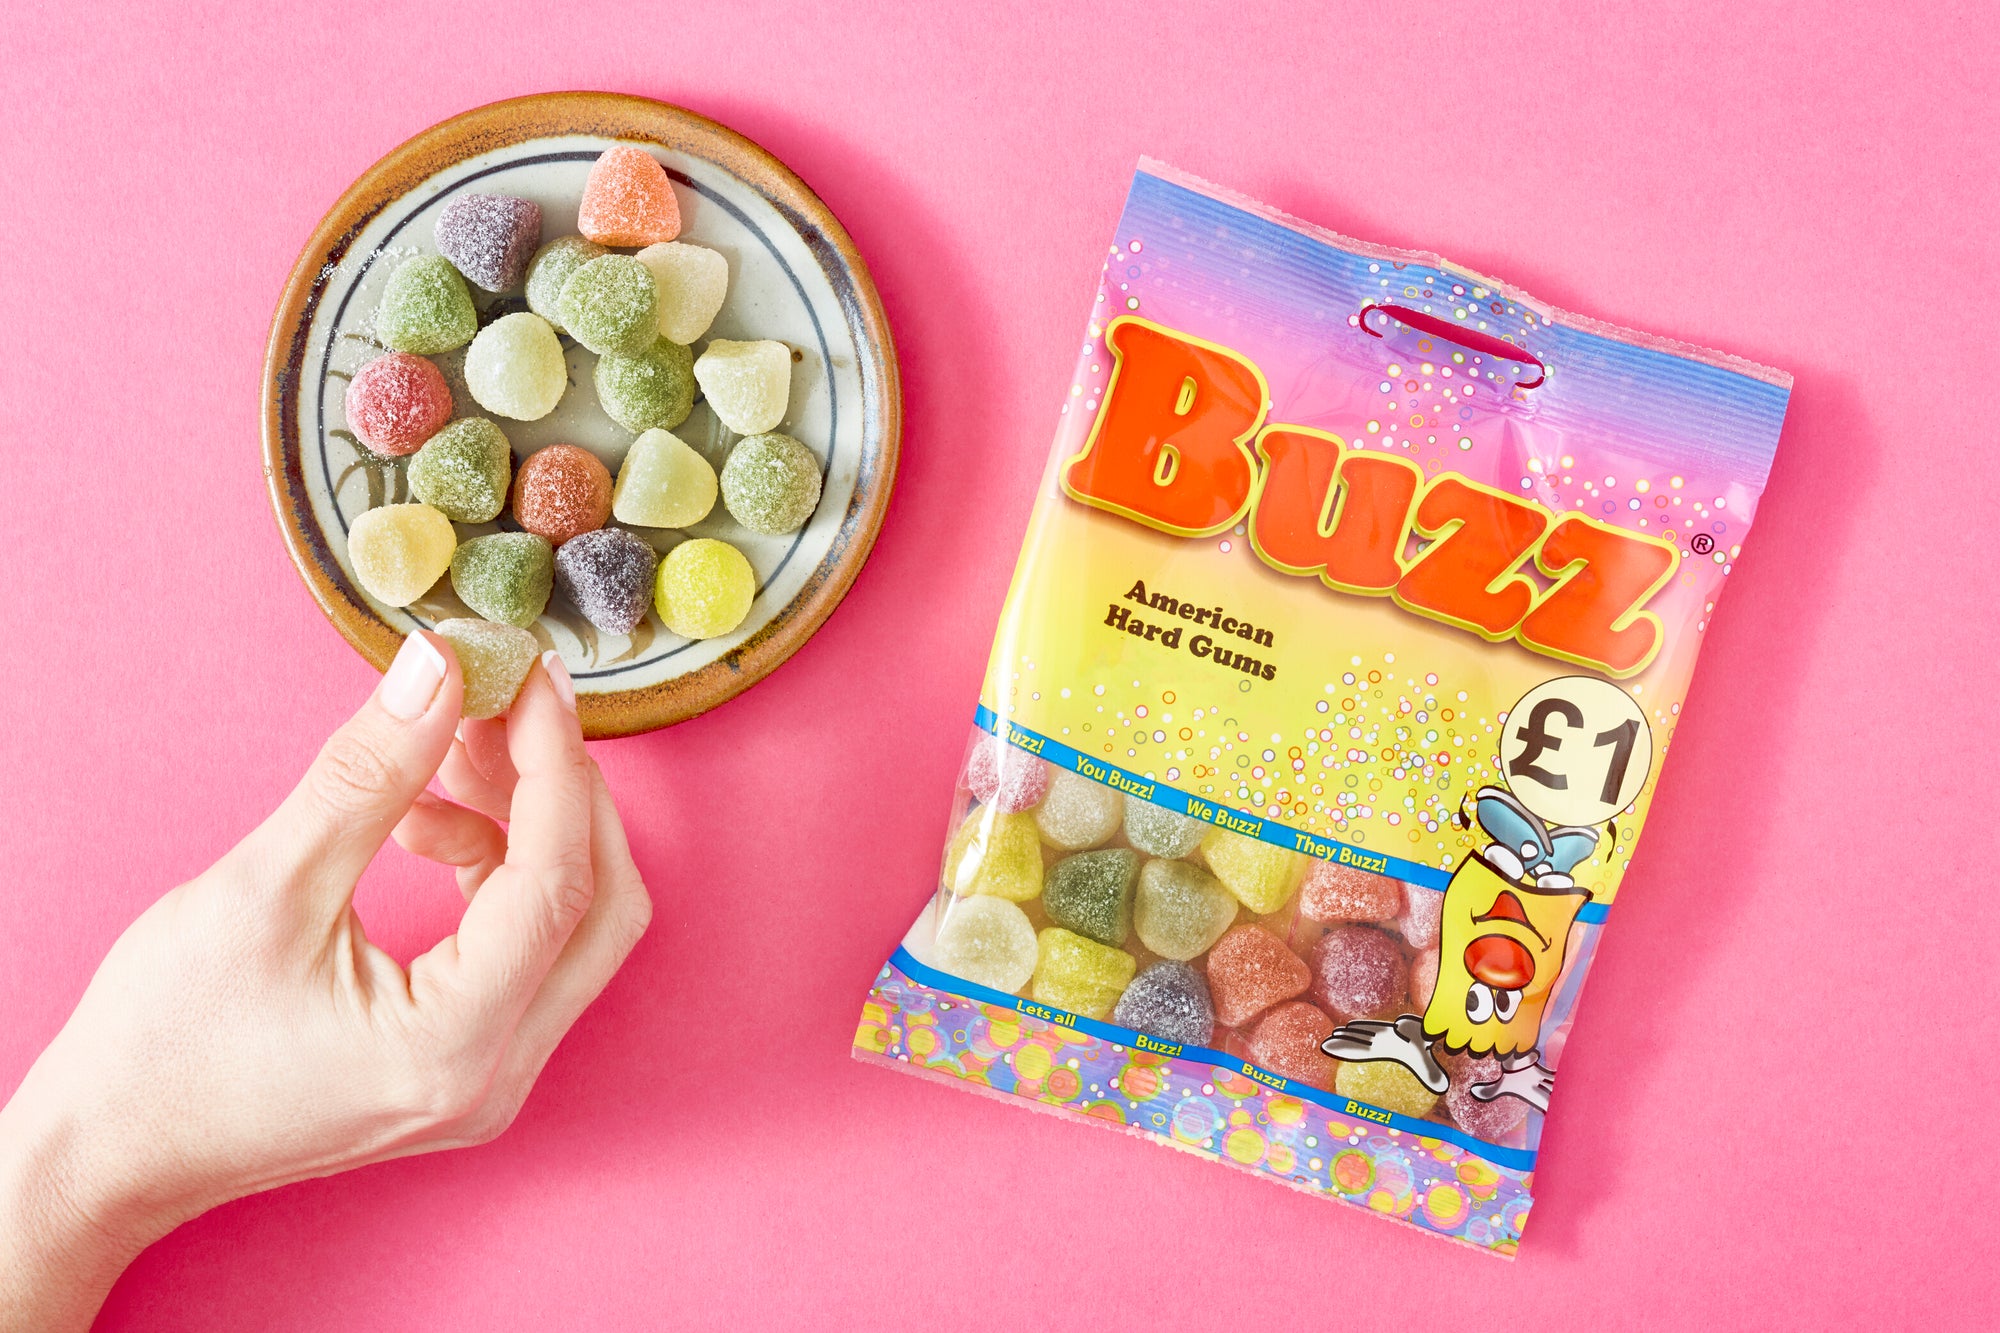 Buzz Sweets Hard Gums | Share Pack